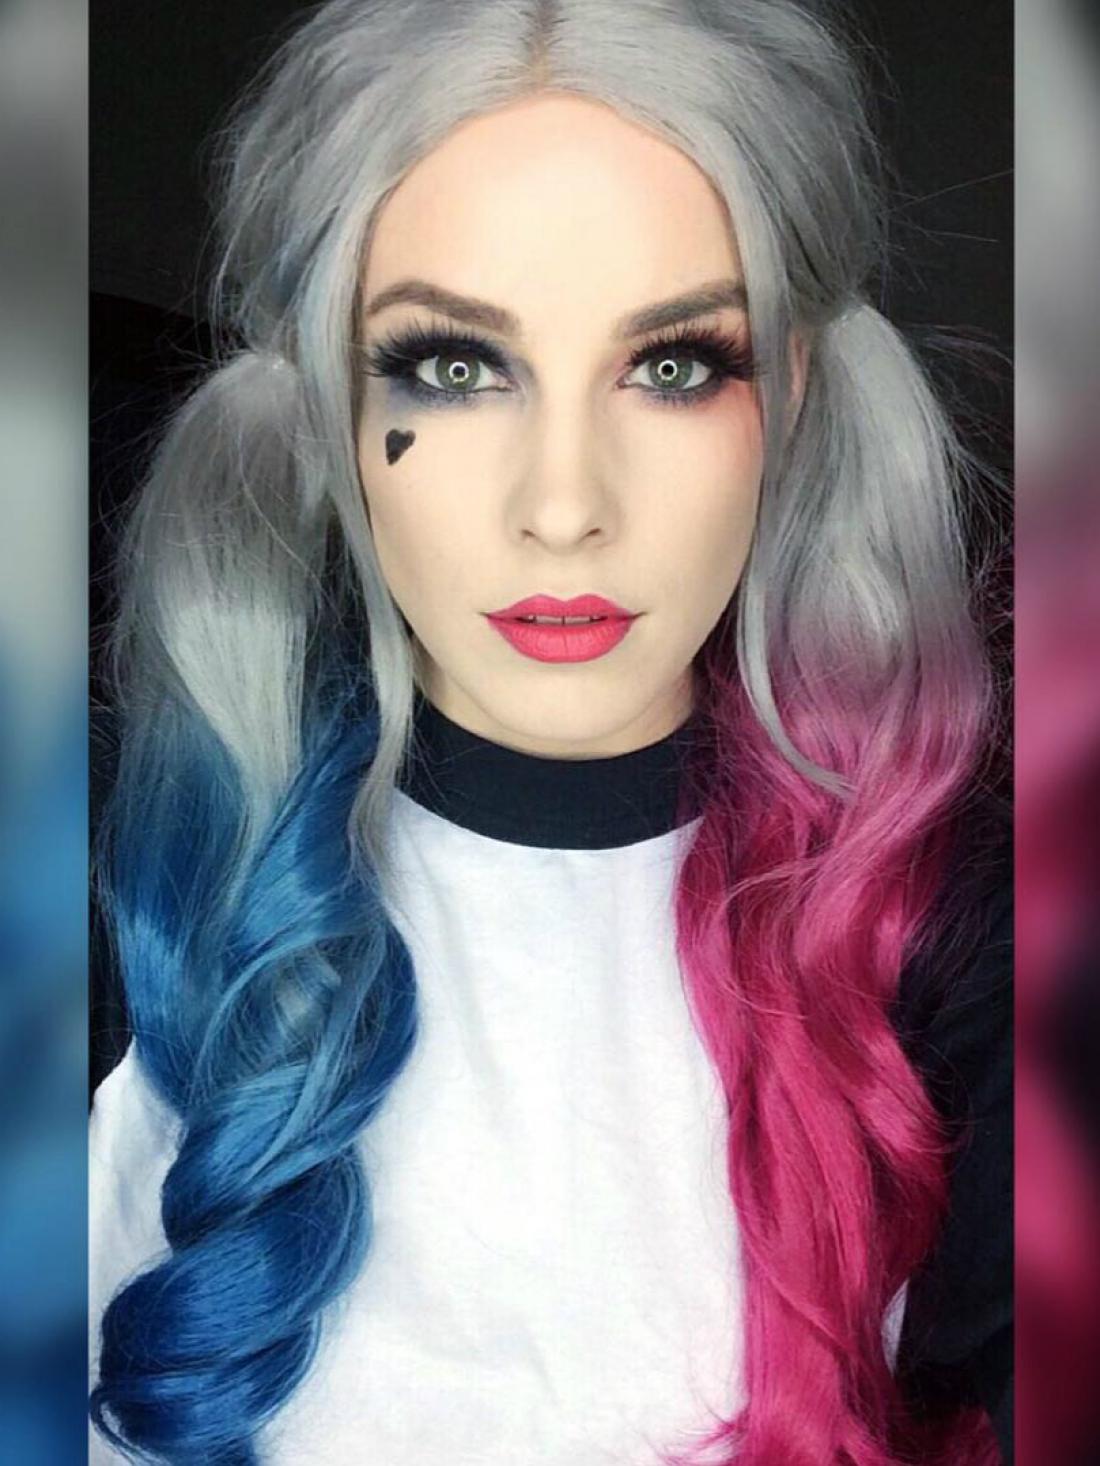 Evahair Harley Quinn Inspired Hair Color Half Blue Half Pink Synthetic Lace Front Wig All Synthetic Wigs Evahair